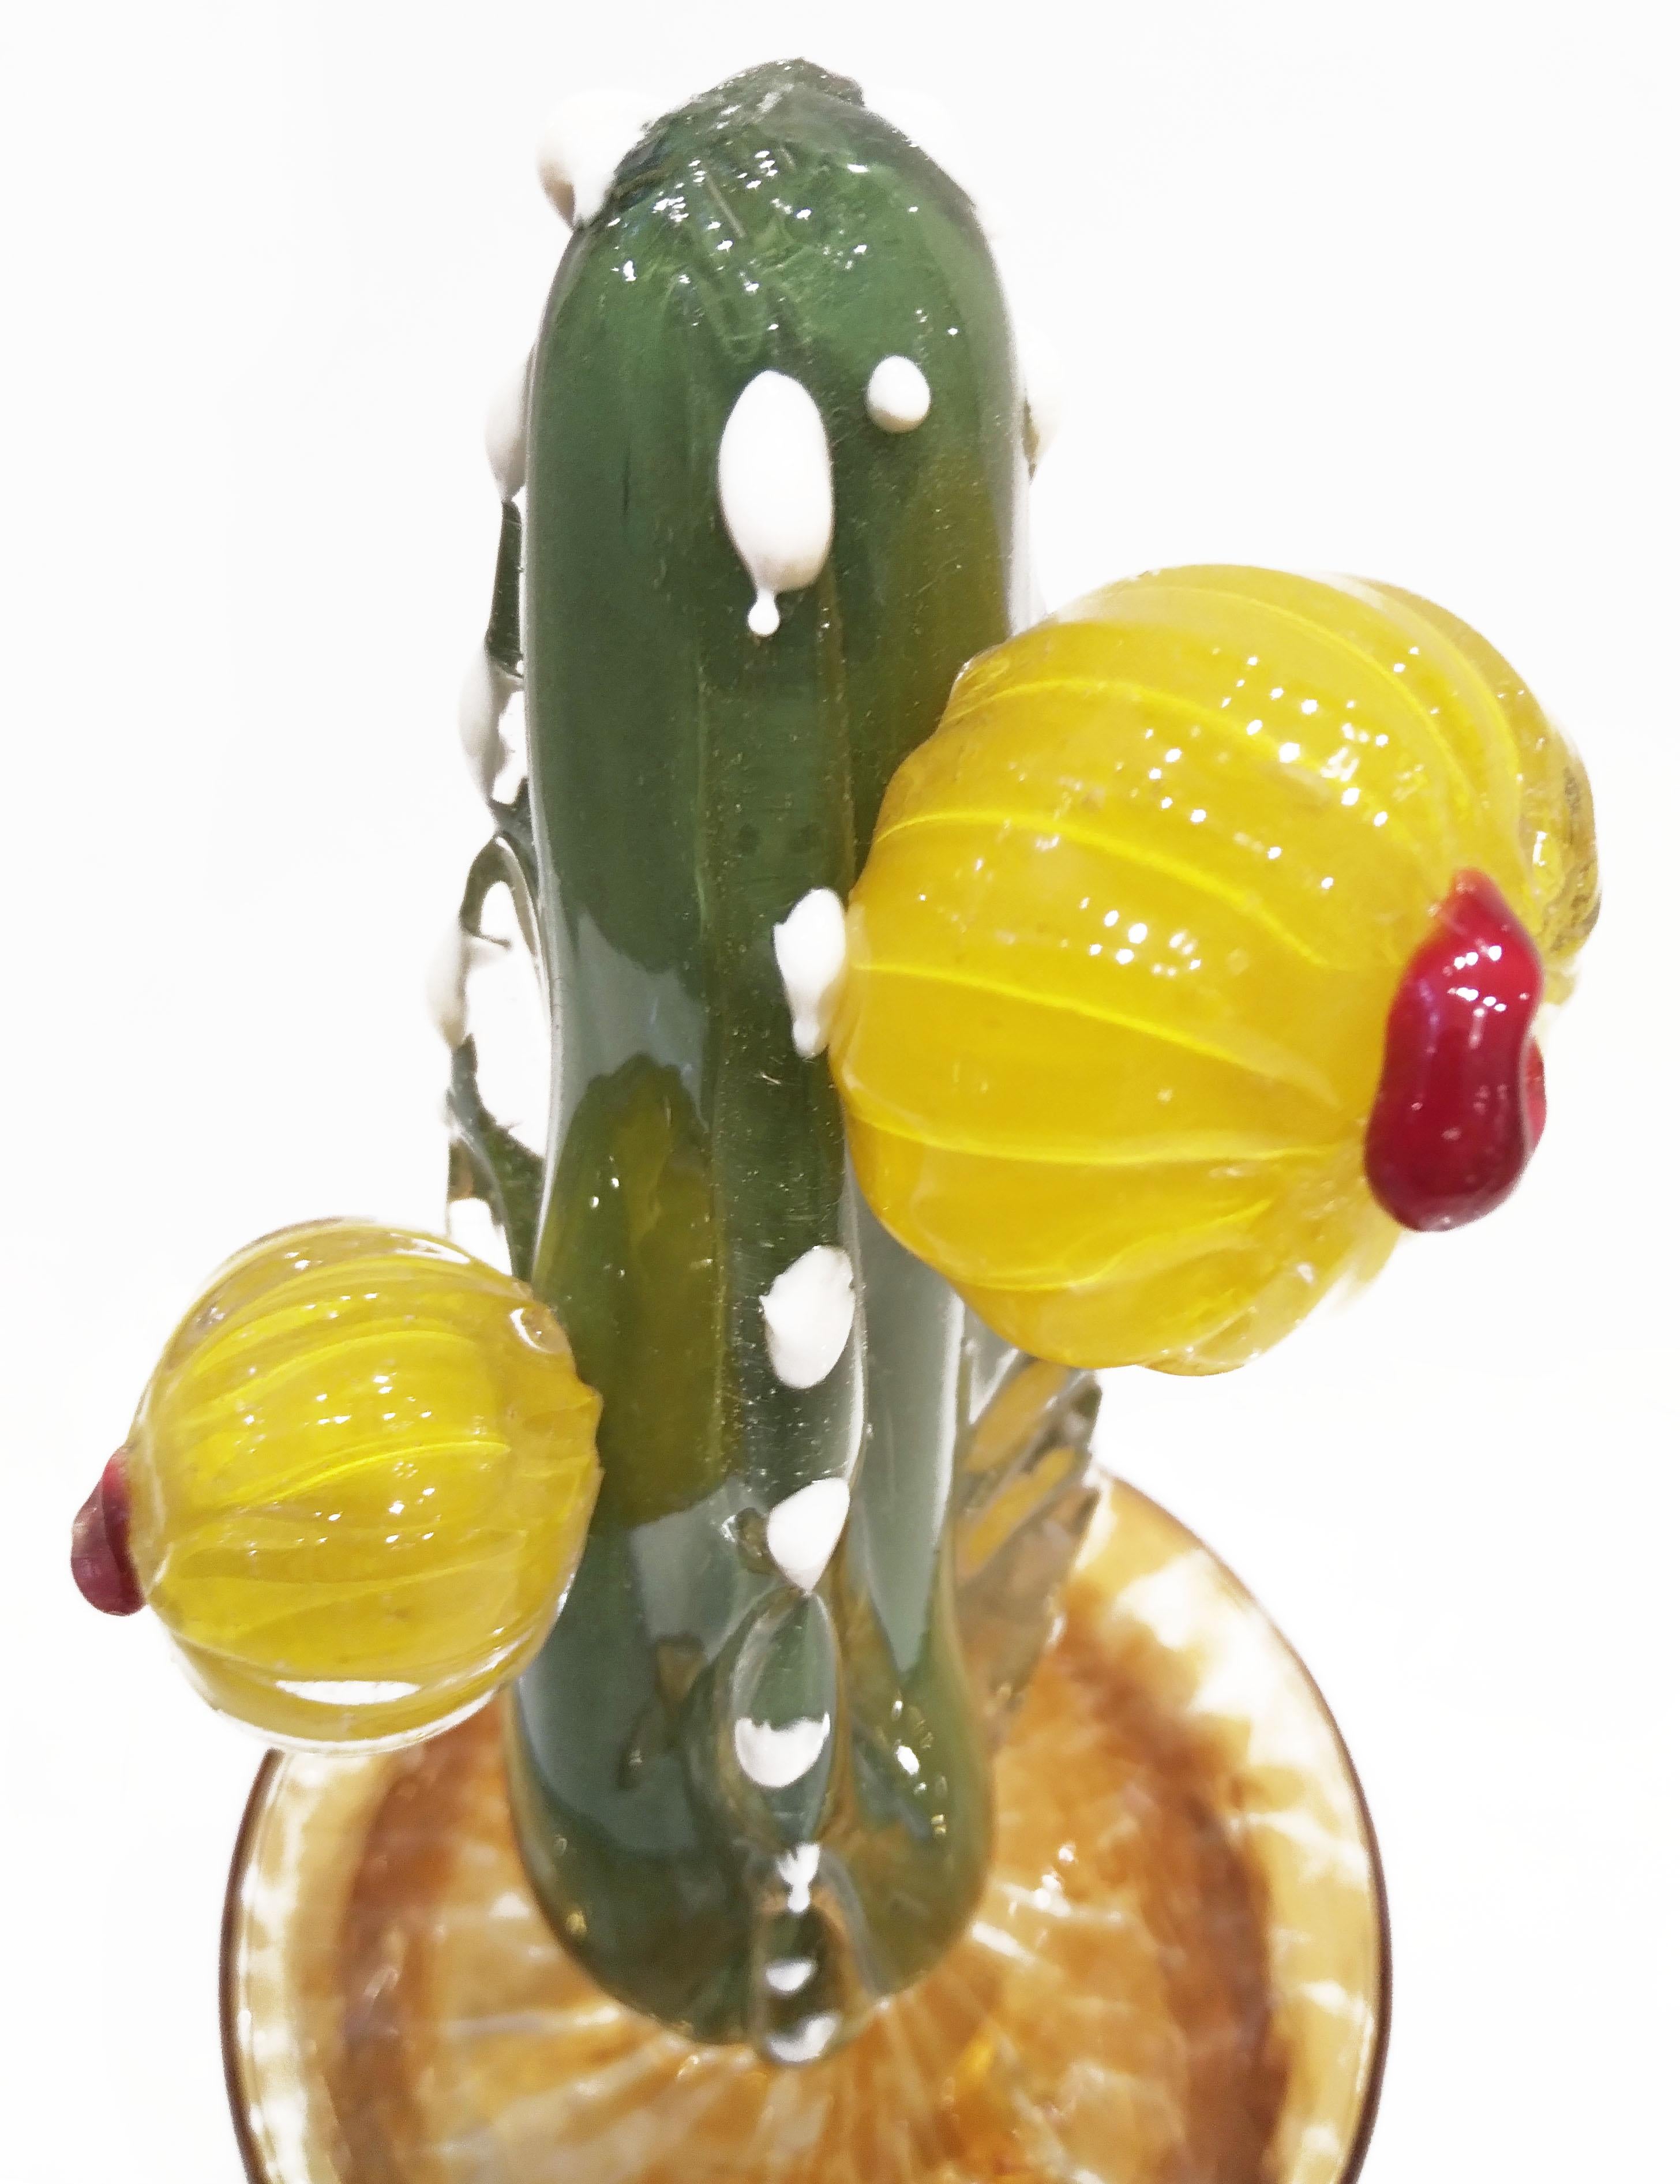 Contemporary Italian highly collectible potted glass cactus of limited edition, entirely handcrafted in Murano, with modern Minimalist design blown by Fornace Mian, in a lifelike organic modernist shape in overlaid moss green Murano glass